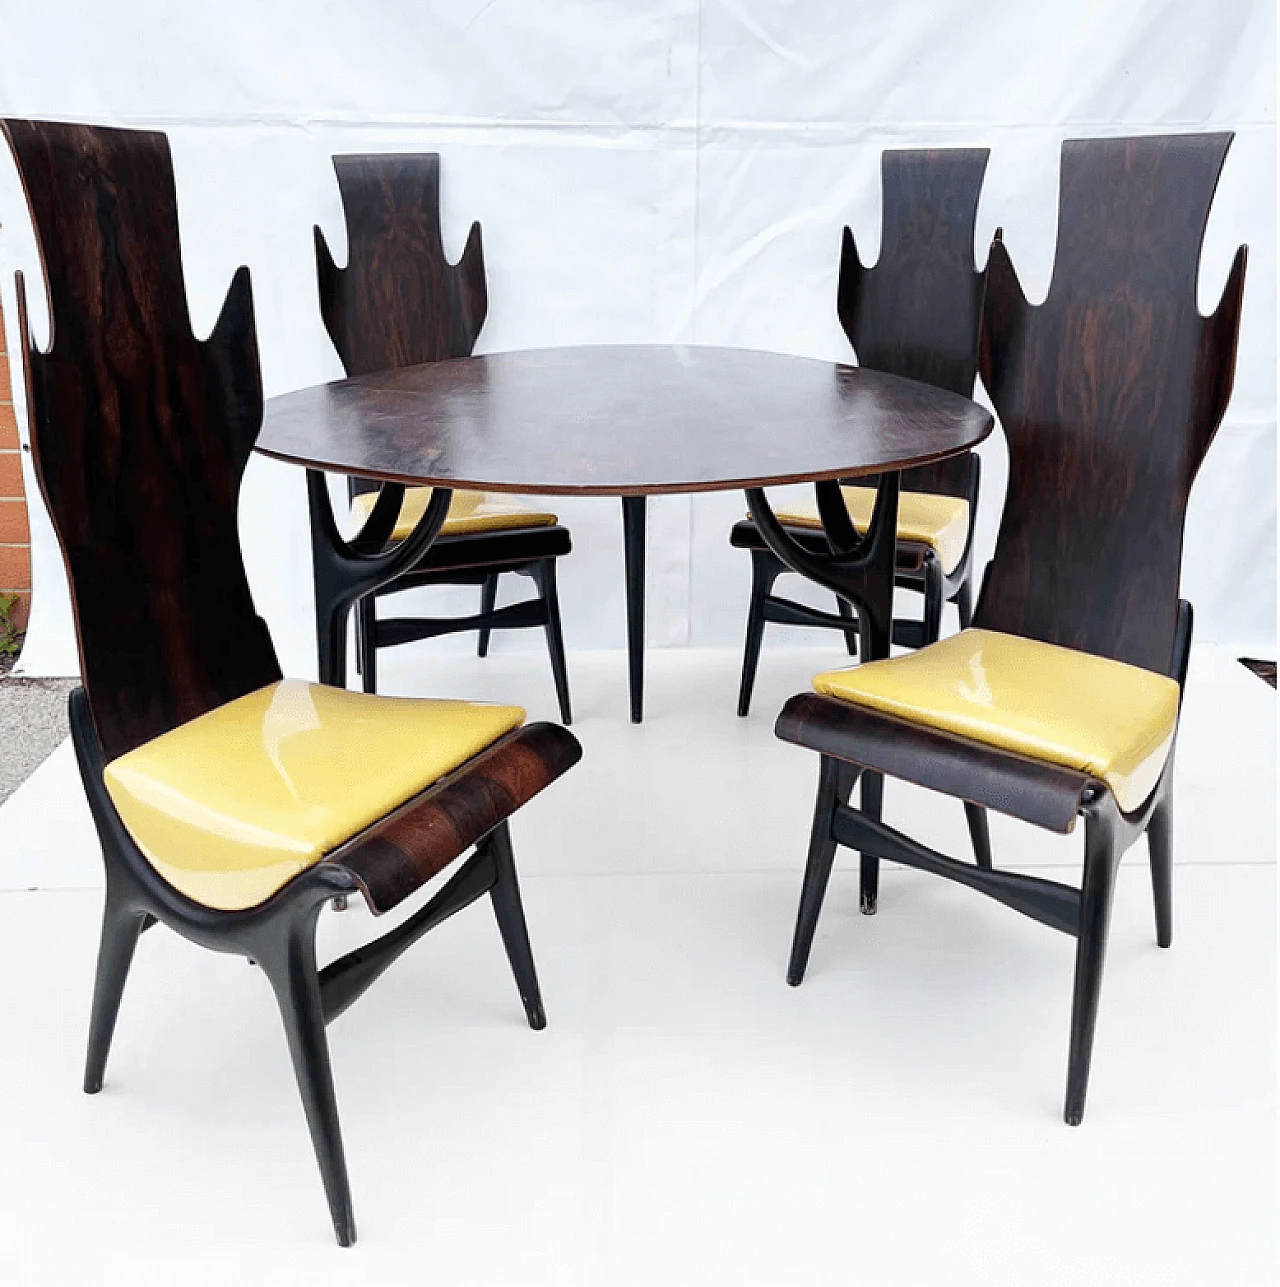 A table with 4 chairs by Dante Latorre, 1950s 2